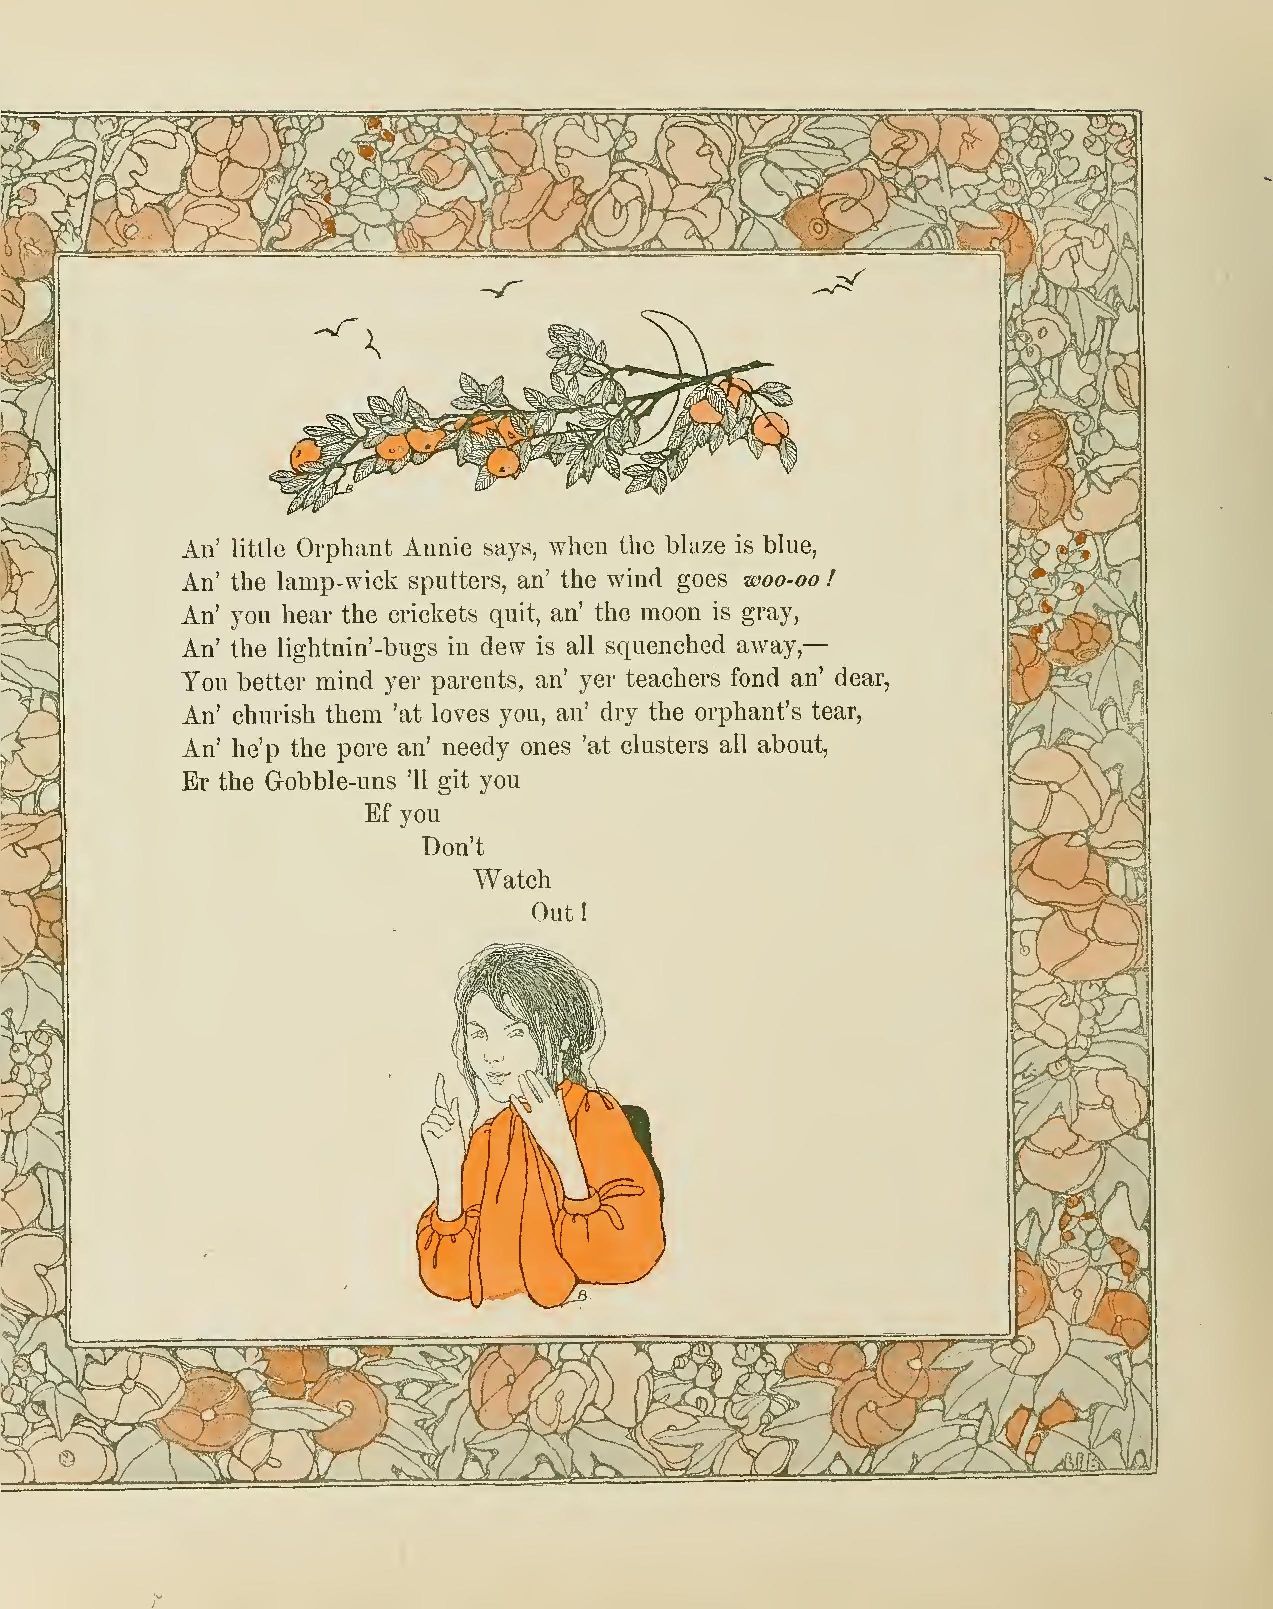 Little Orphan Annie, by James Whitcomb Riley